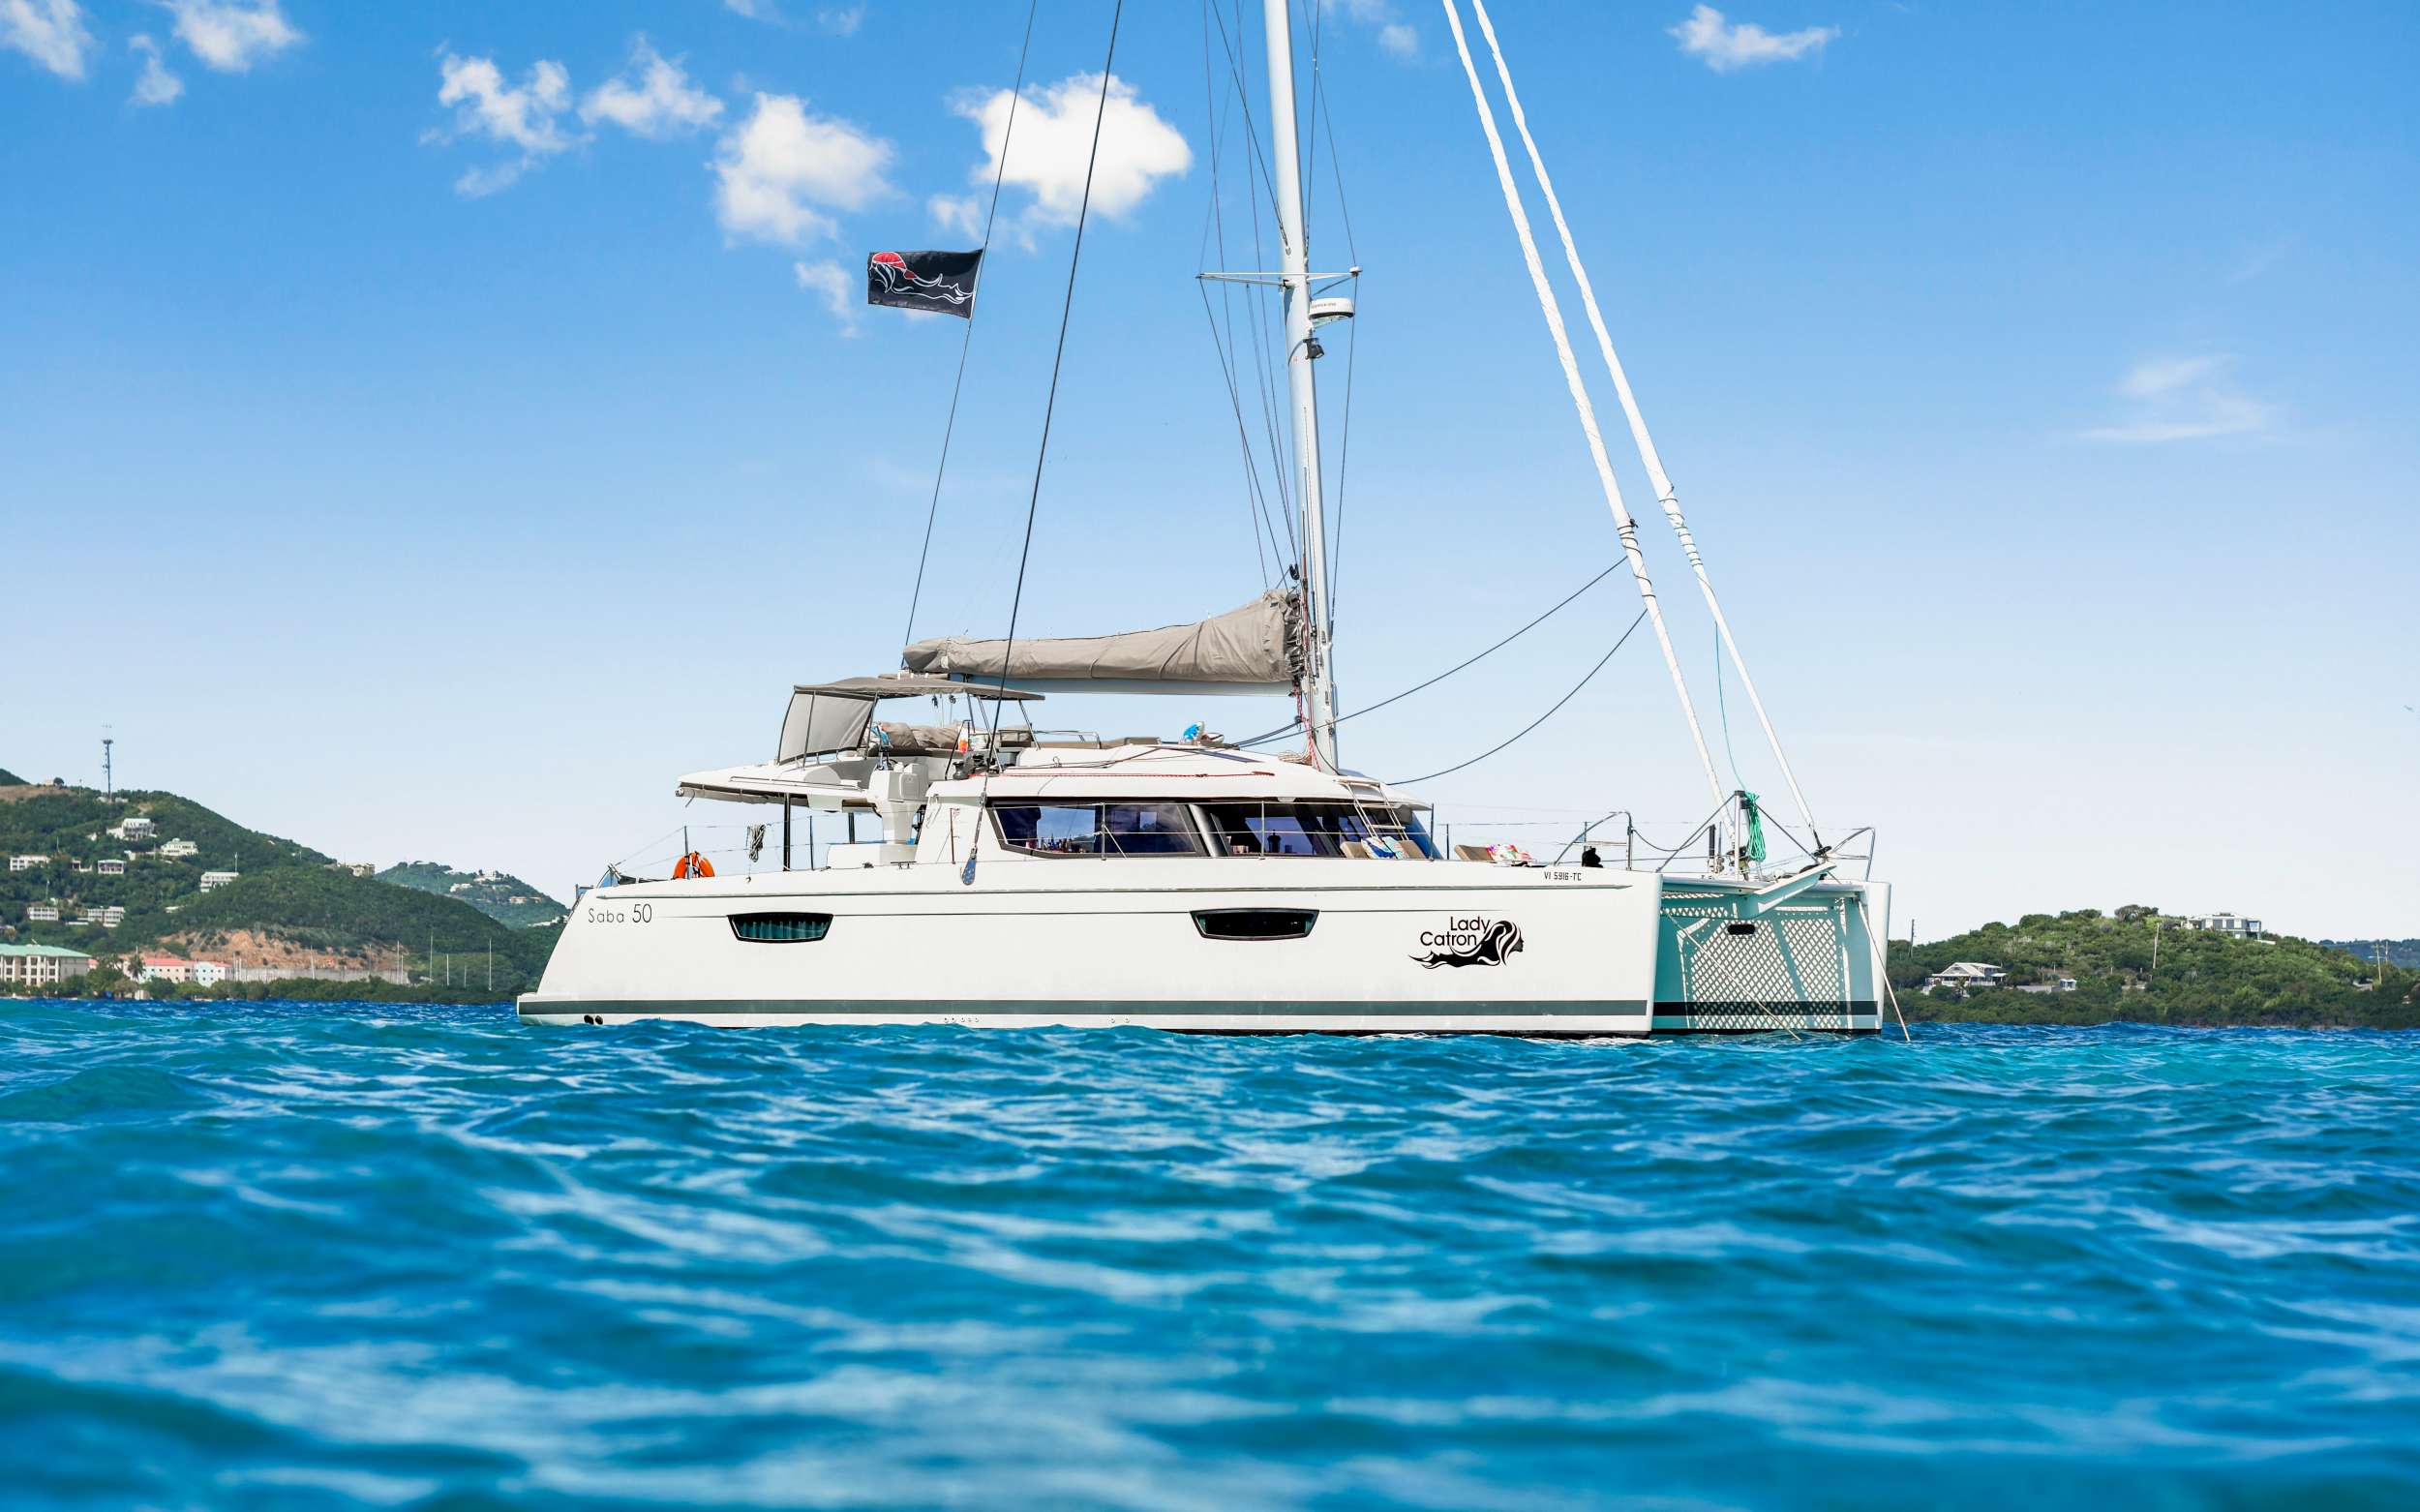 This beautiful 2017 Fountaine Pajot features an upper deck lounge that has sectional couch and sunbed area with 360 degree view. The forward deck has spacious lounge area with adjustable reclining seating, trampolines and sunning areas with an aft deck that offers lounge area plus alfresco dining area. The salon offers lounge area with coffee table plus flat screen TV with many movies and USB capabilities. Upgraded 4 zone sound system provides music throughout all indoor and outdoor areas. For guest comfort, she has three queen cabins and 1 twin cabin, each with private ensuite bath with electric toilet, wash basin and separate shower stall. A spacious master stateroom has desk space, separate toilet room, and a walk-in shower. The twin cabin may be used to accommodate 2 children to make this an 8-guest charter yacht. All cabins have air conditioning, two fans, 110v outlets and dimmable recessed lighting. 

TOYS: 3 Stand Up Paddle Boards, Snorkeling Gear, Floating Mats, 1 Kneeboard, 1 Wakeboard, 1 Subwing, 2 Fishing Rods &amp; Onshore Games.

DIVING: Offered via rendezvous only